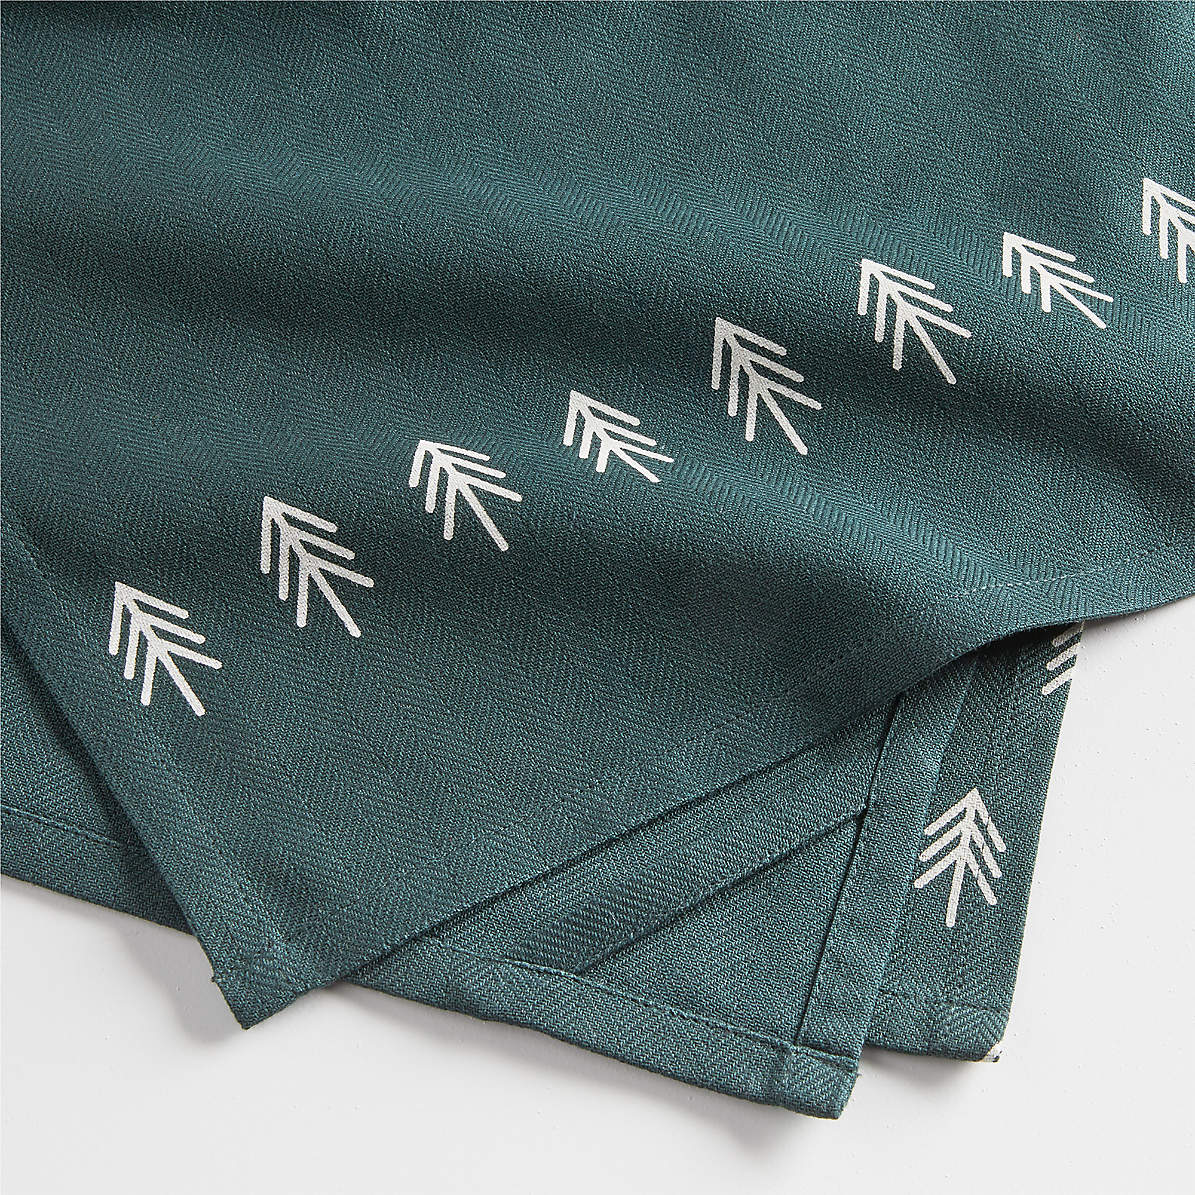 Set of Two 100% Organic Green Cotton Dish Towels